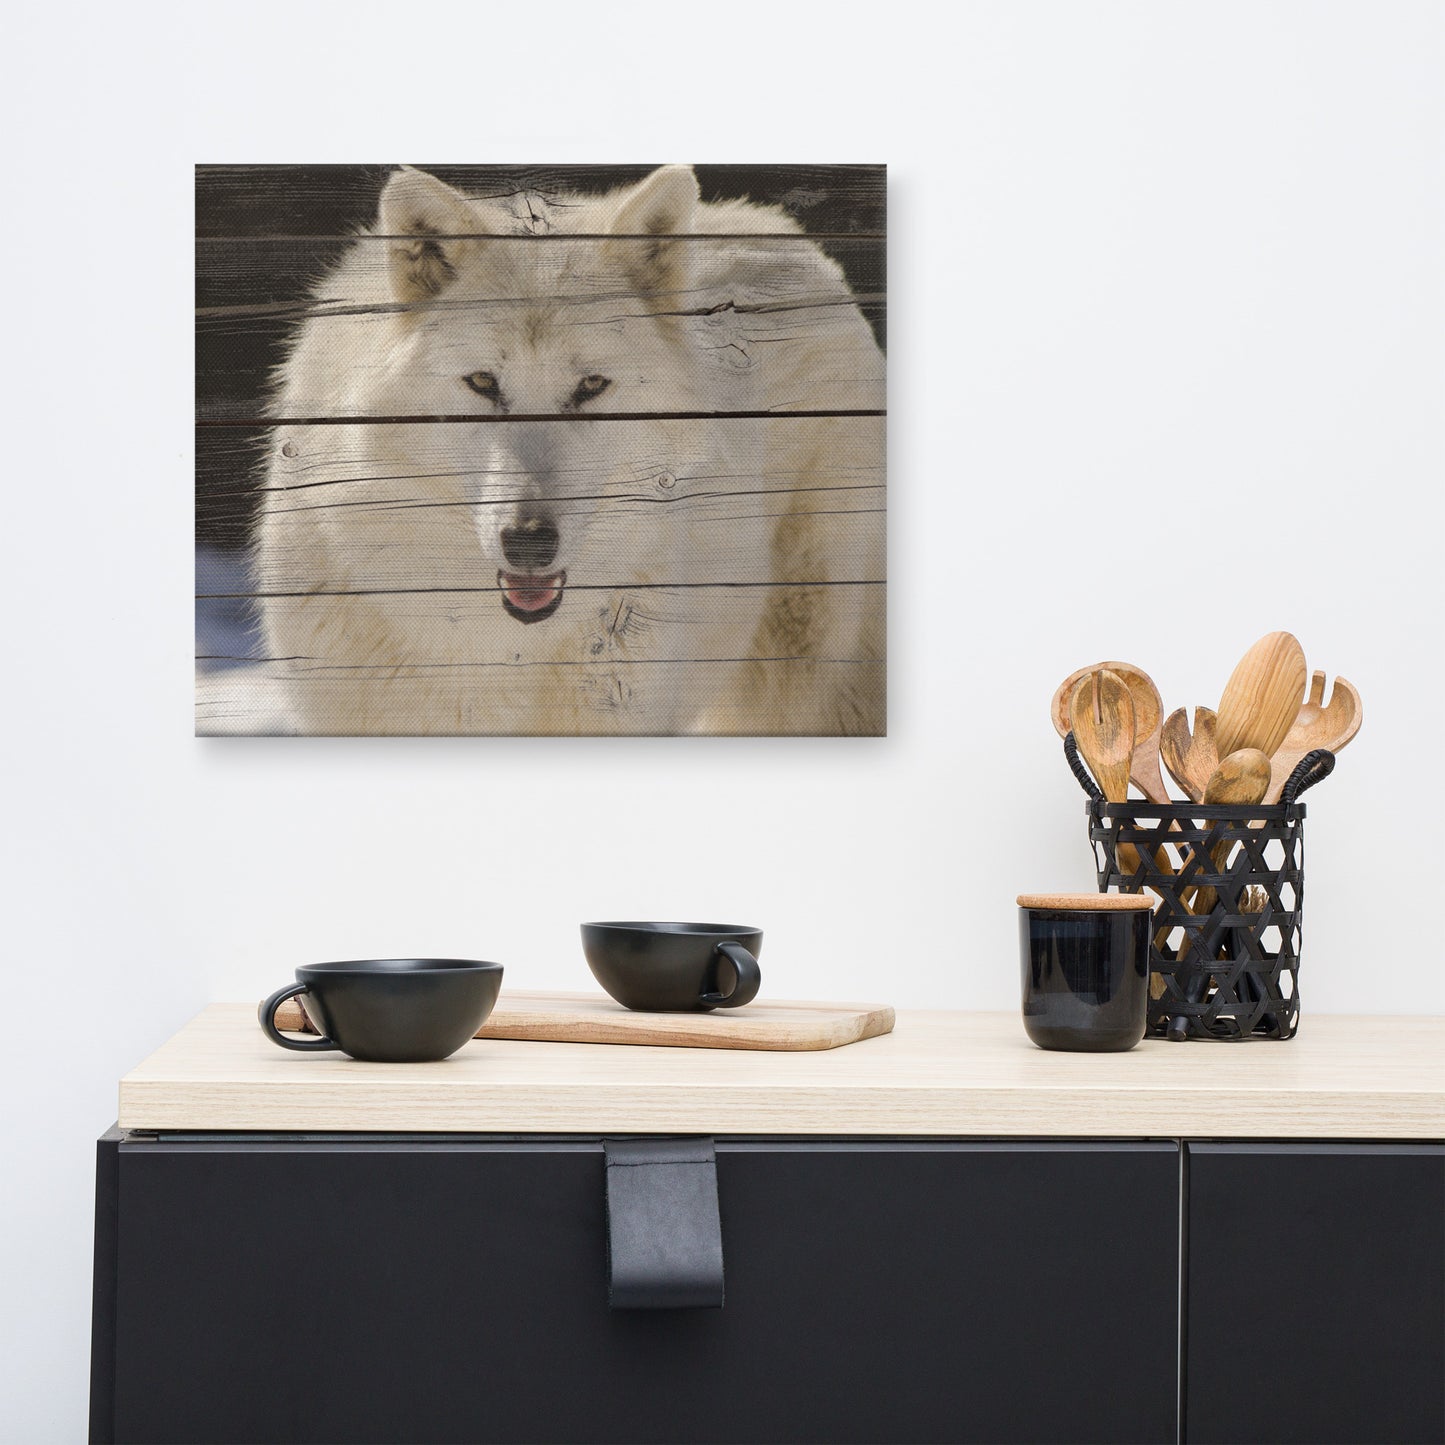 Kitchen Modern Wall Decor: White Wolf Portrait on Faux Weathered Wood Texture - Wildlife / Animal / Nature Photograph Canvas Wall Art Print - Artwork